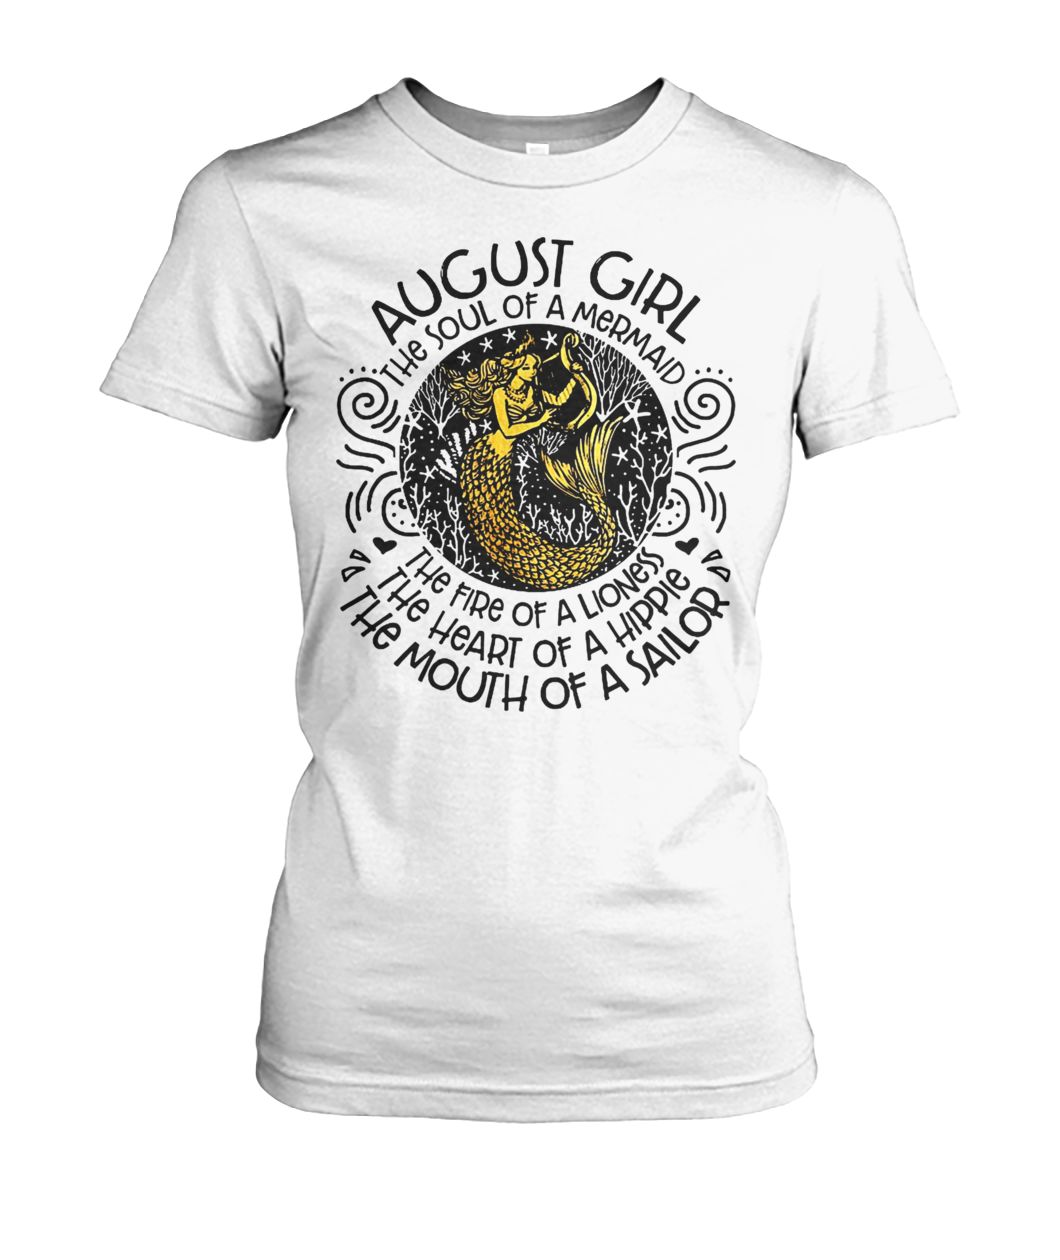 August girl the soul of a mermaid the fire of a lioness the heart of a hippie the mouth of a sailor women's crew tee